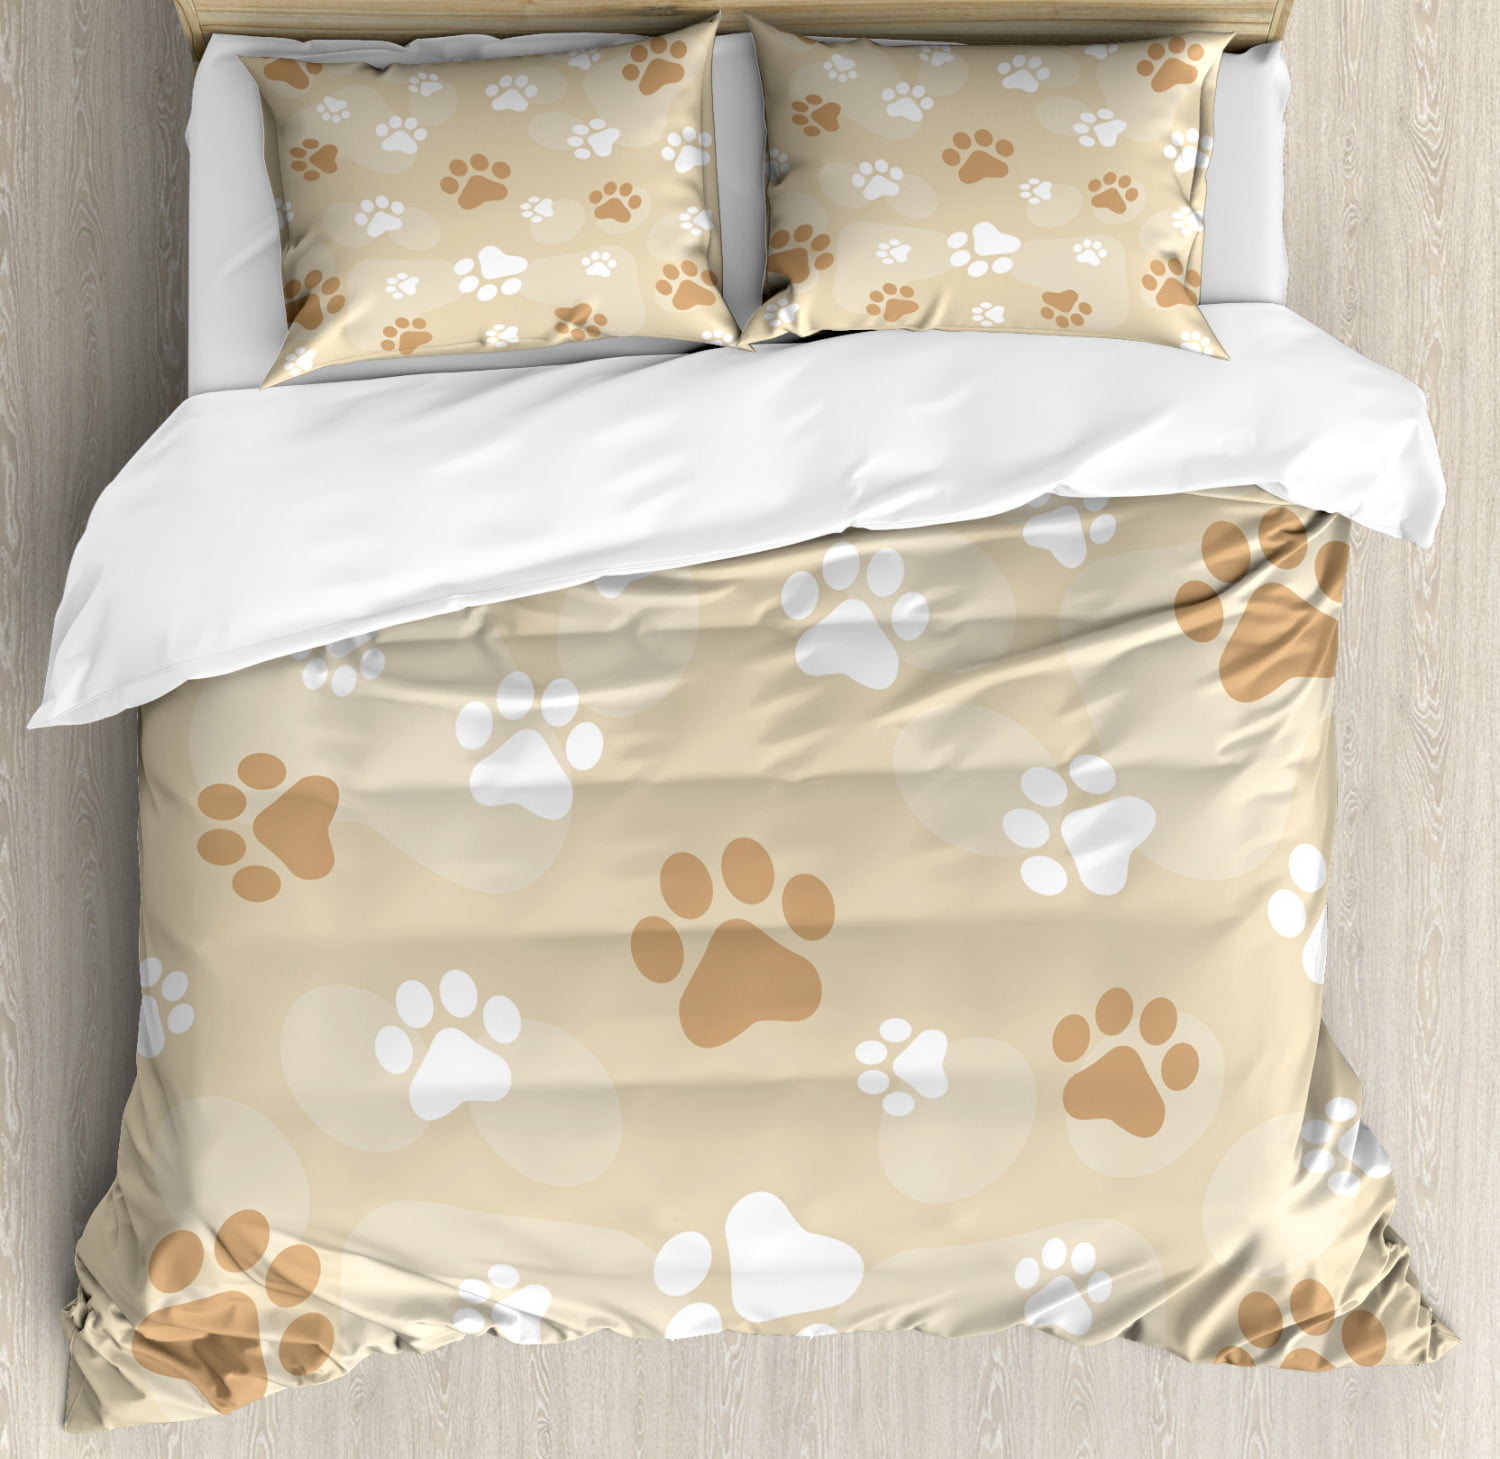 Earth Tones King Size Duvet Cover Set, How To Put A Duvet Cover On King Size Bed